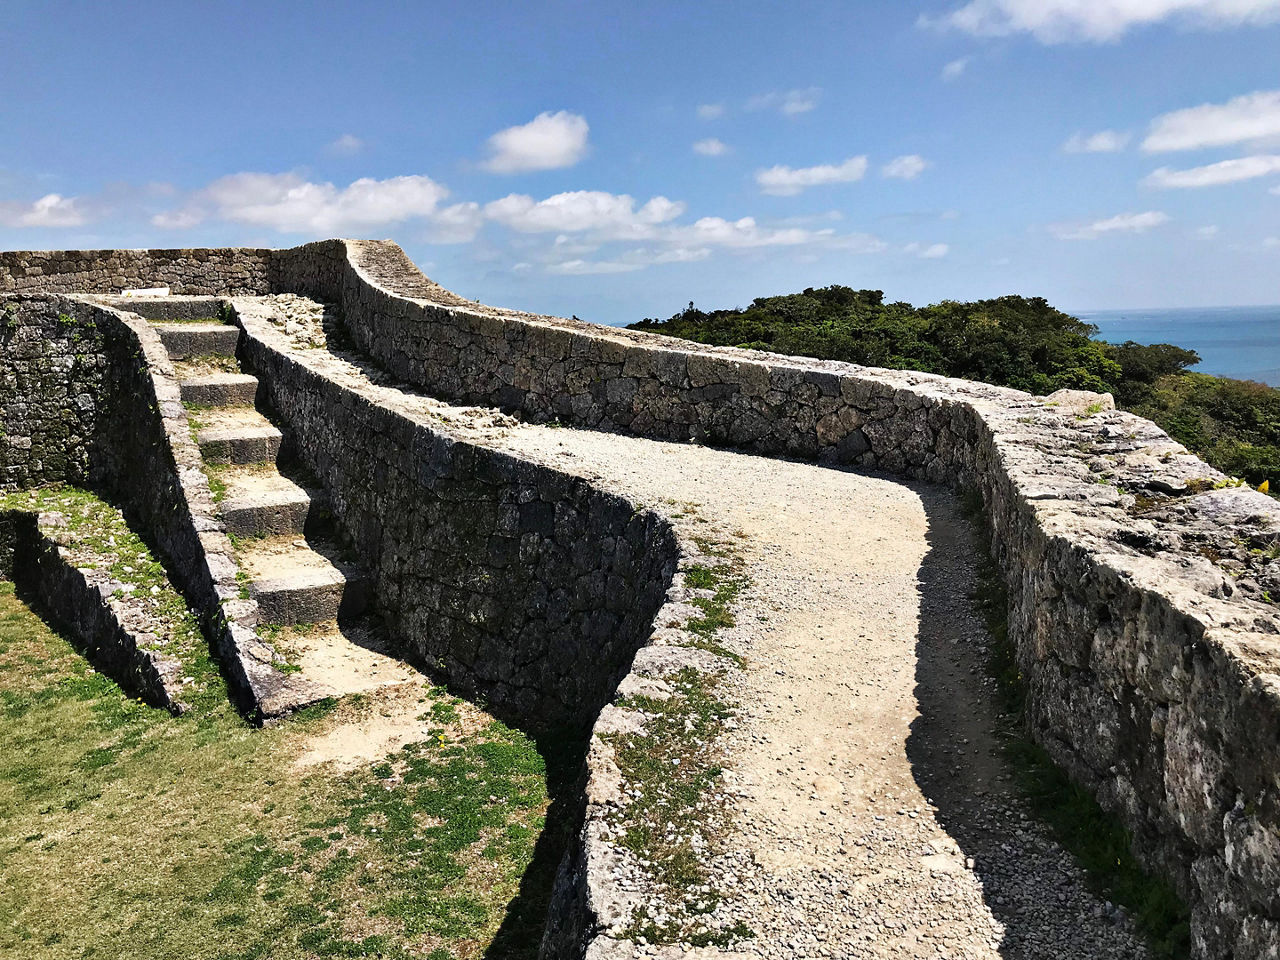 Part of the stone wall with stairs at Nakagusuku castle in Okinawa, Japan